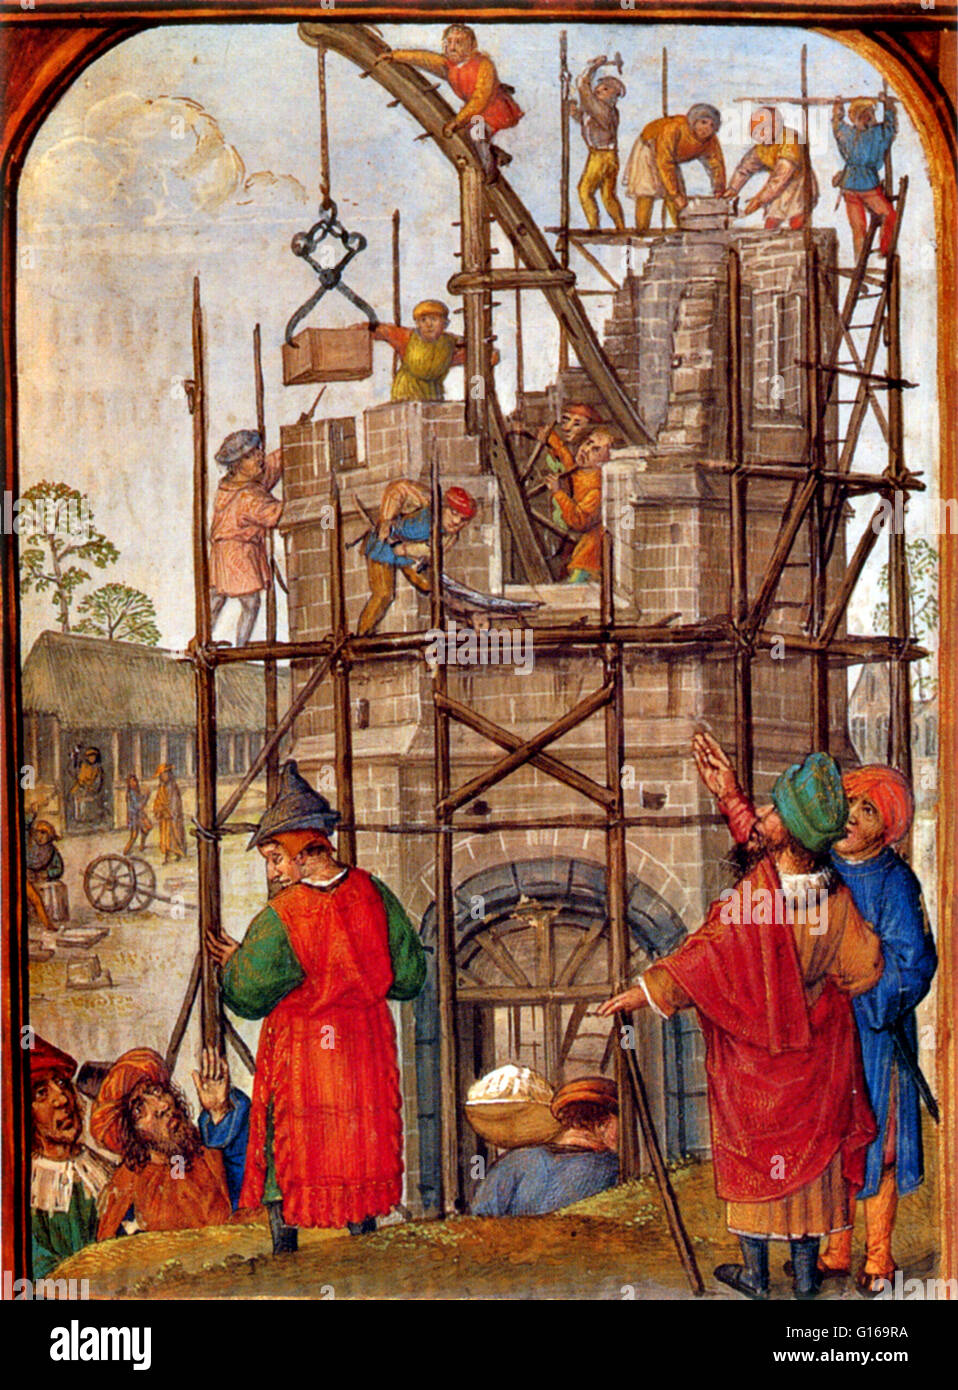 Illustration from a 15th century Flemish Book of Hours showing the building of the Tower of Babel. Note the inaccuracy of including medieval scaffolding, ladders and a crane worked by tread wheel. According to Genesis the people of the Earth built a tower Stock Photo